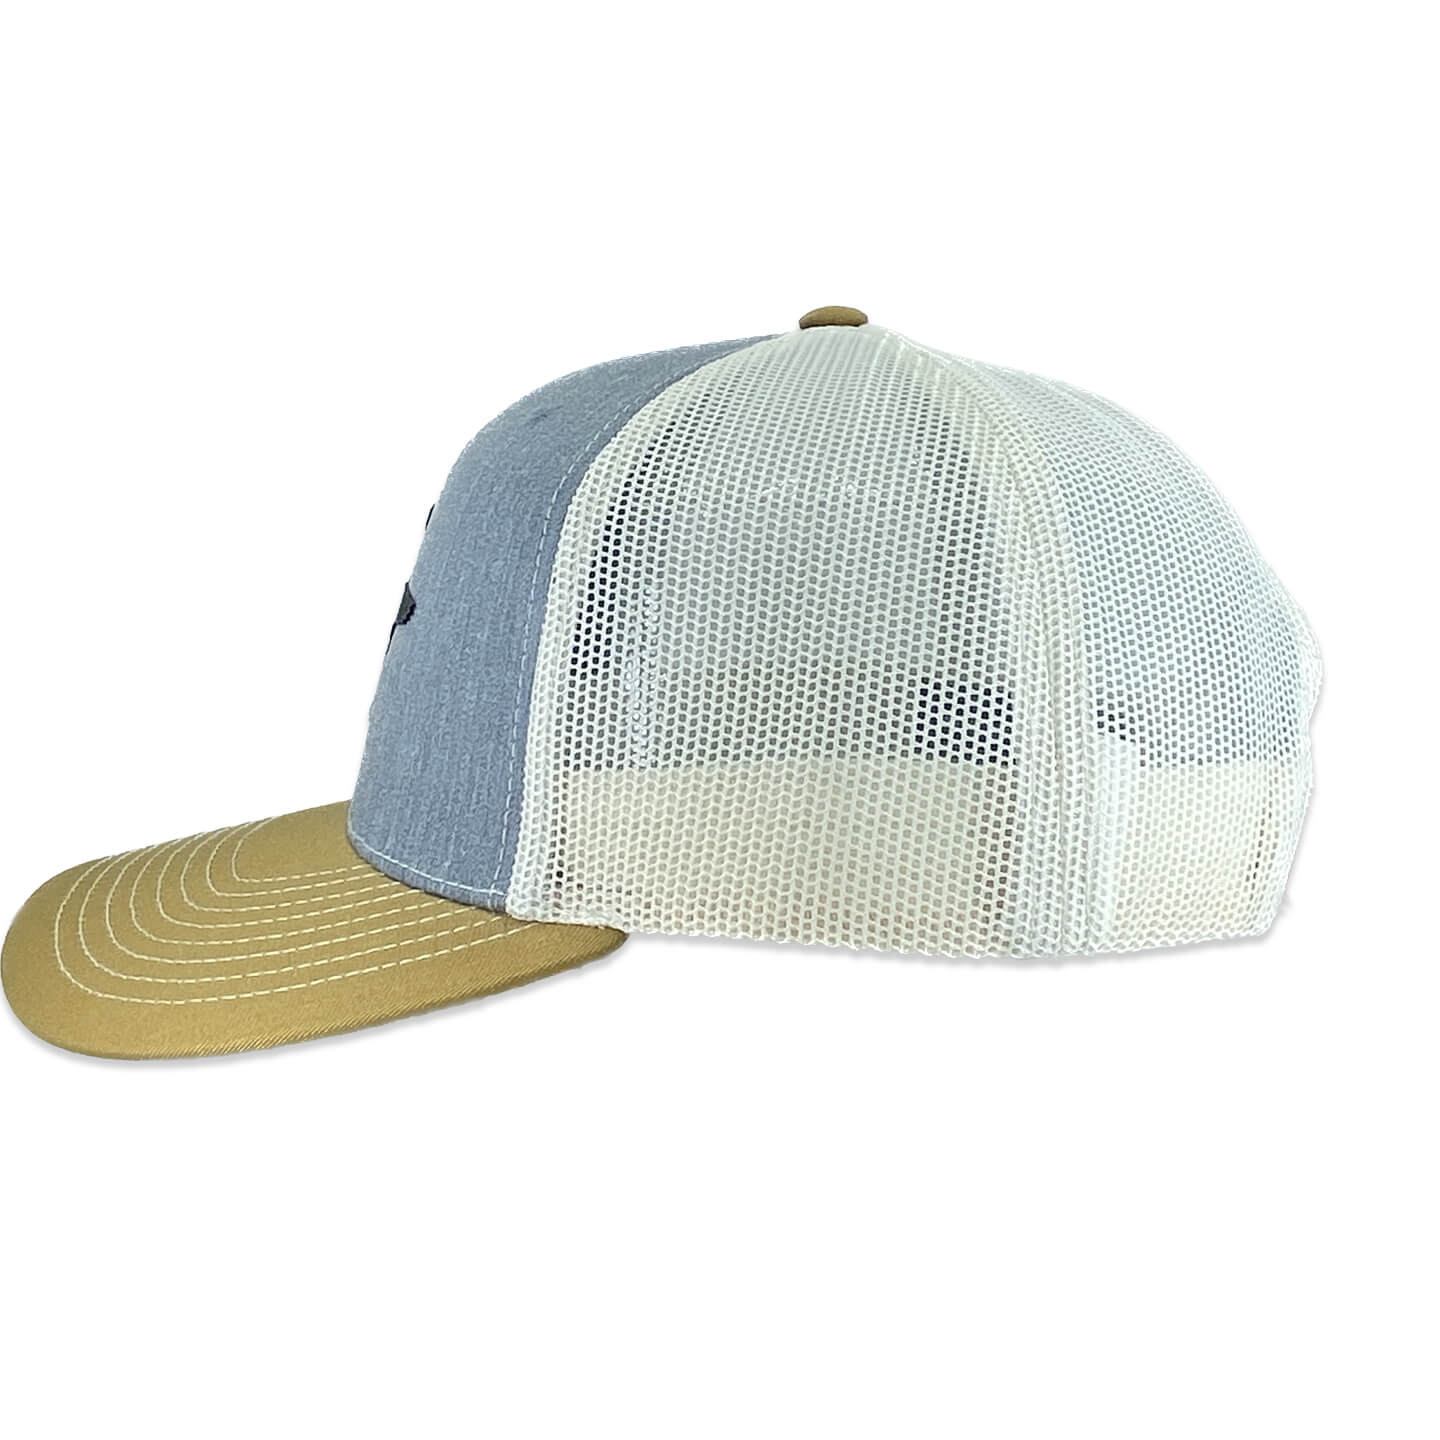 6 panel snapback trucker hat with soft silicone Loon patch